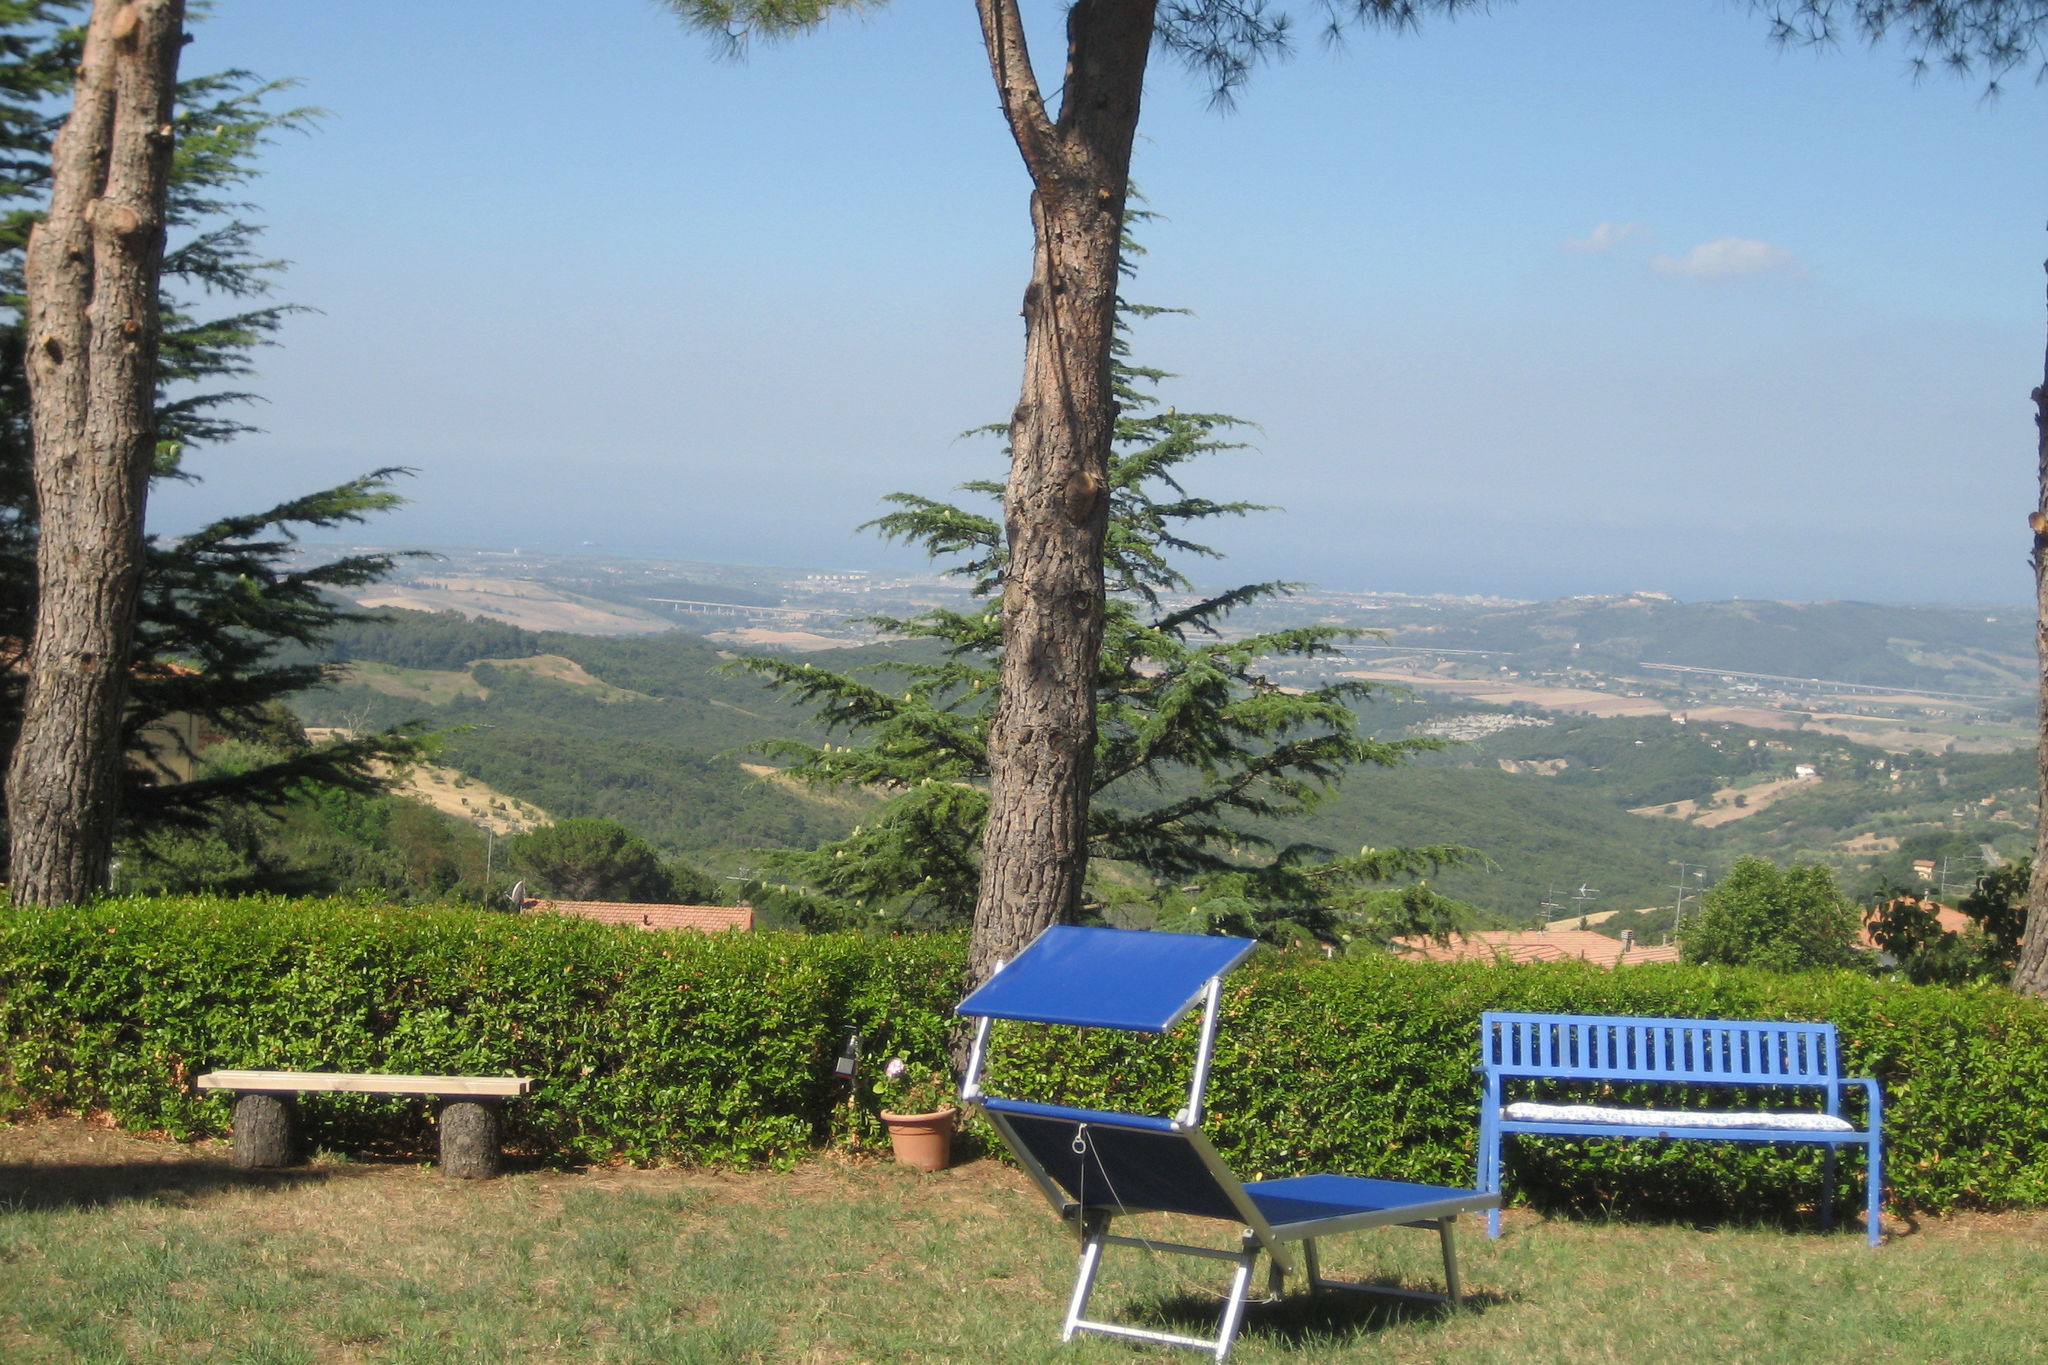 A vacation of sightseeing but also peace among the lovely Tuscan hills